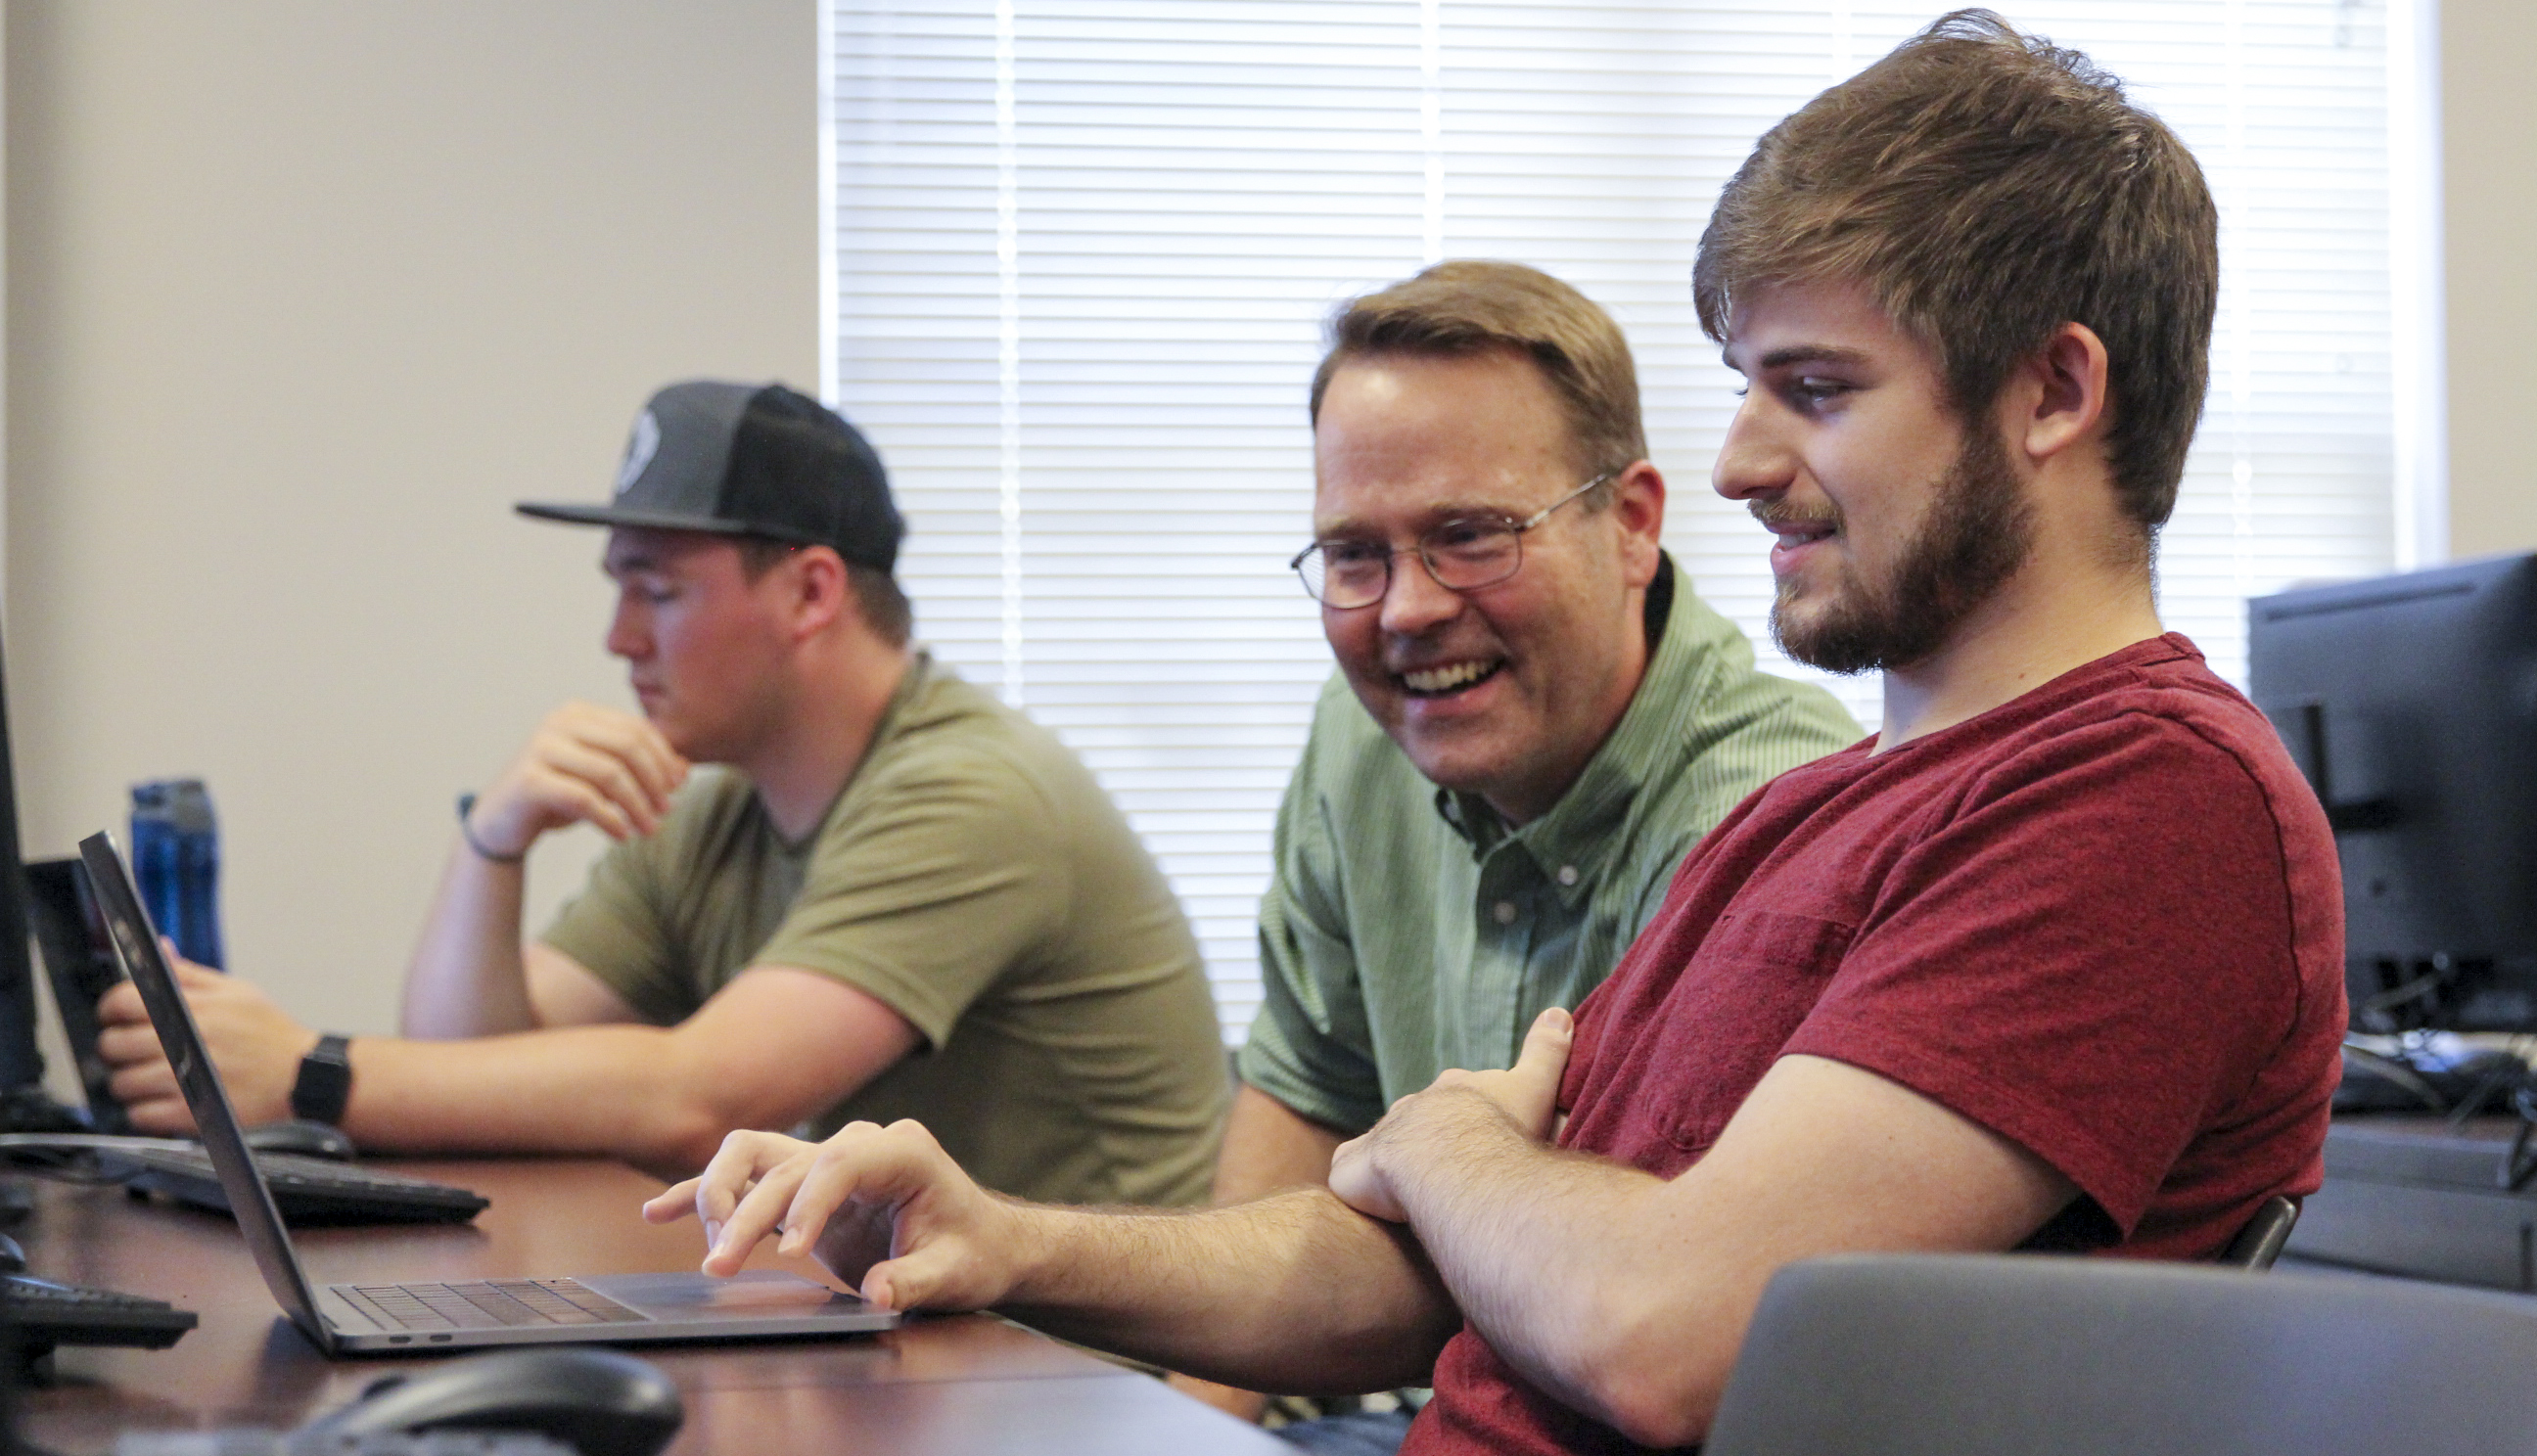 Associate Professor Scott Spurlock consults with students in the Computer Vision course.